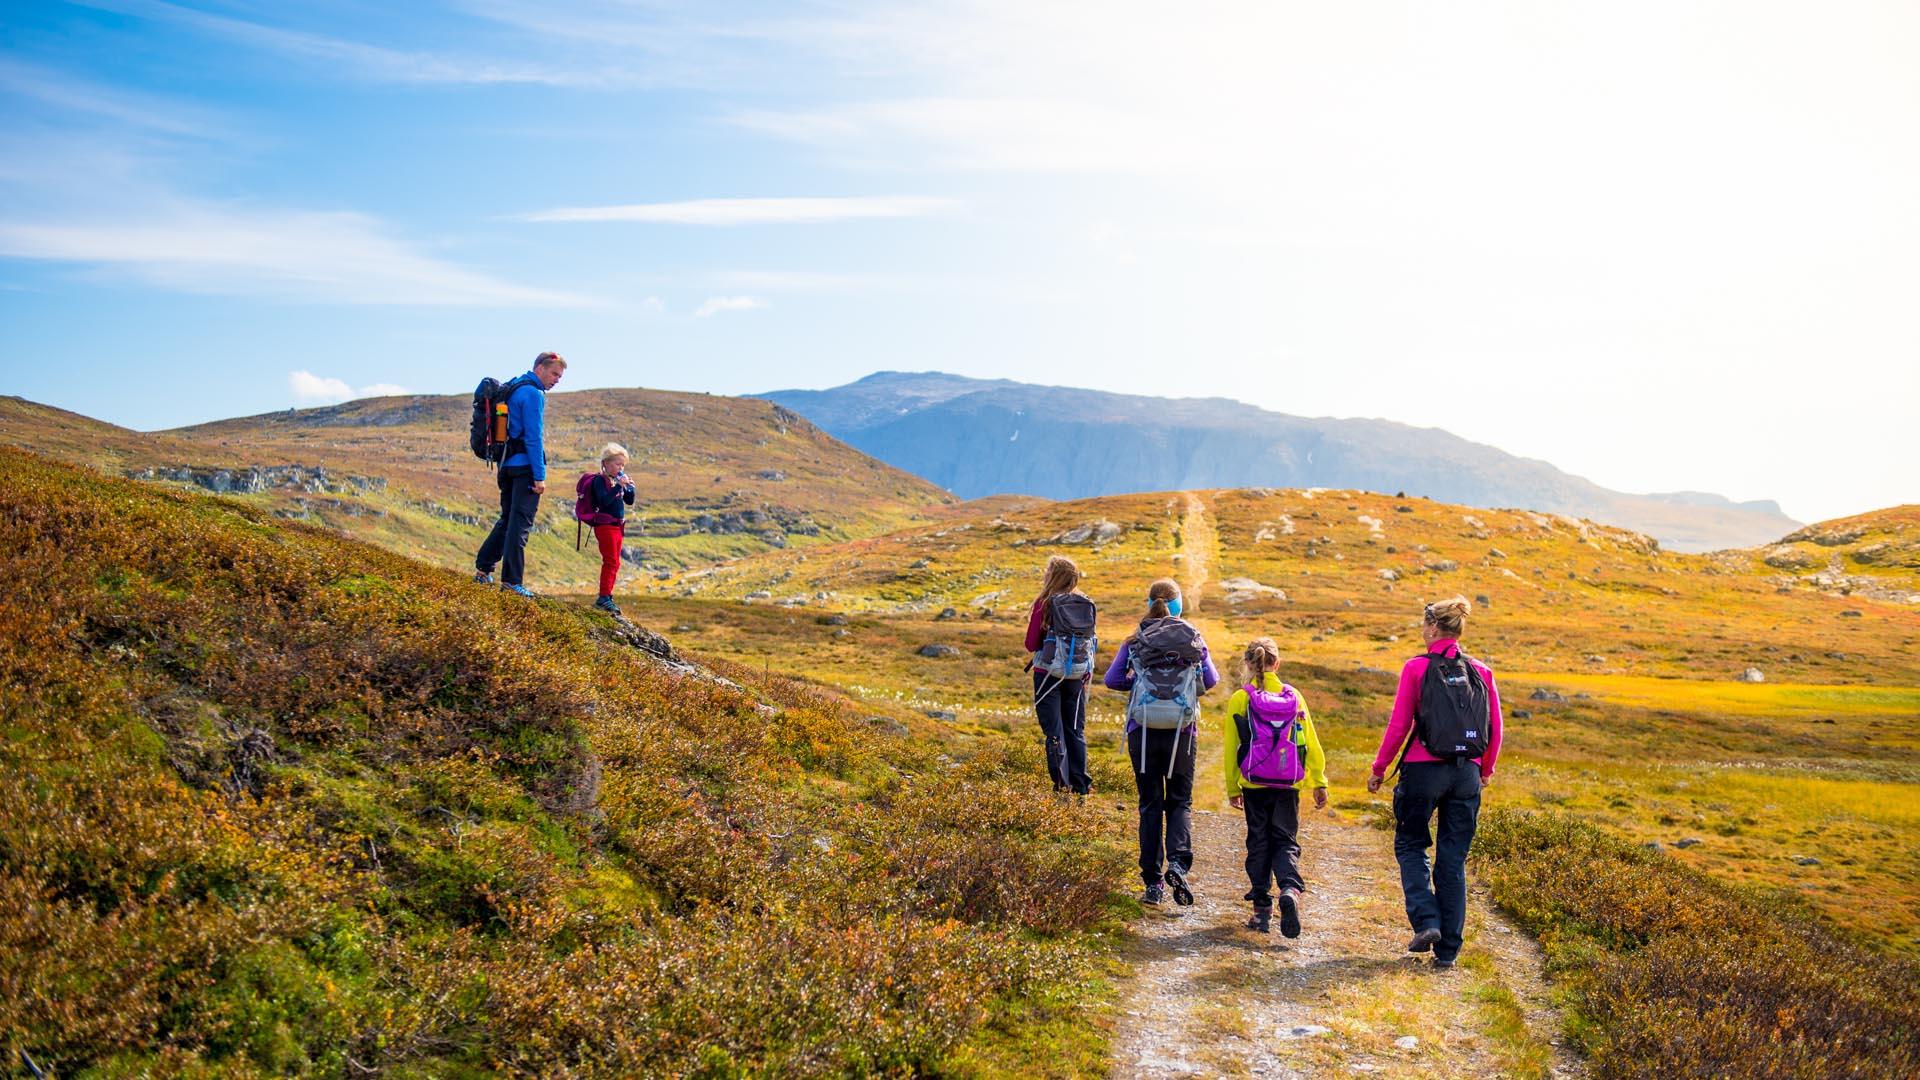 A group of hikers on a broad path which is a historic road over a mountain plateau. The autumn sun is shining.